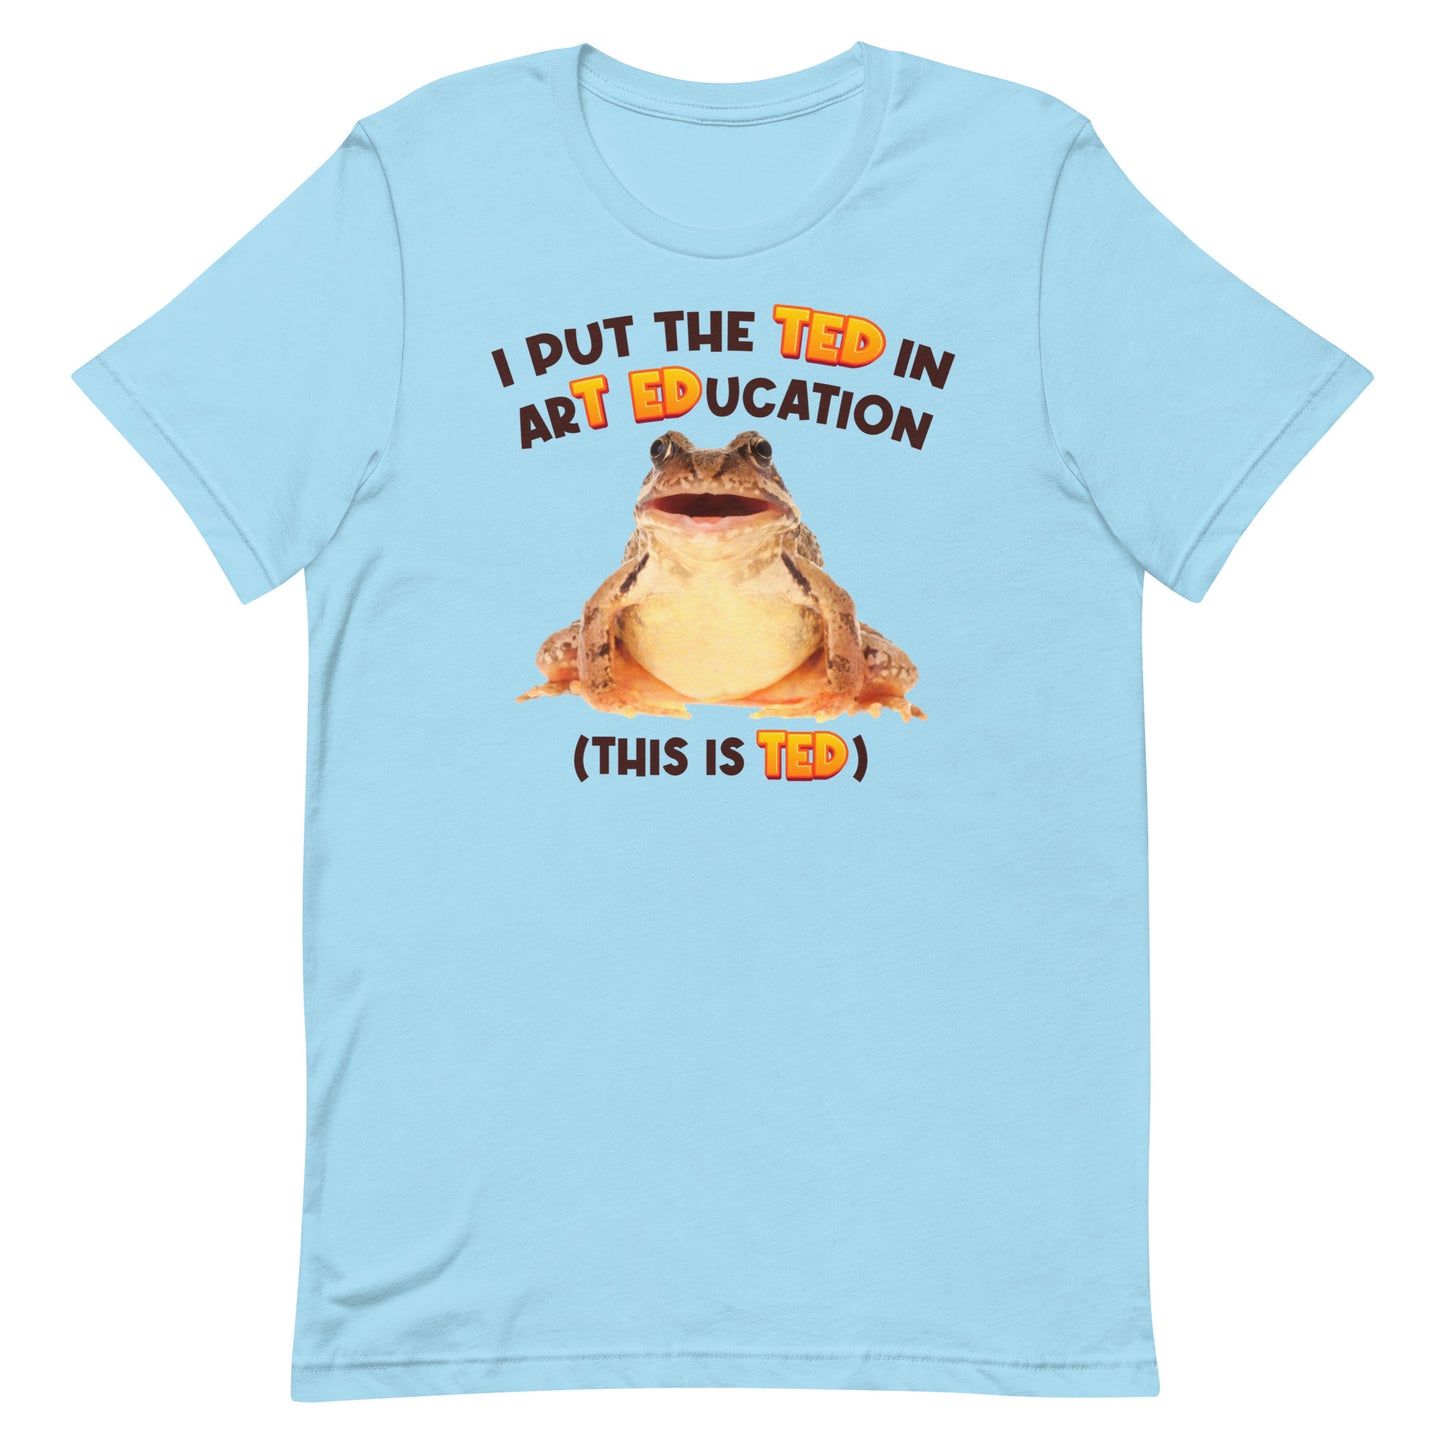 I Put the TED in arT EDucation Unisex t-shirt